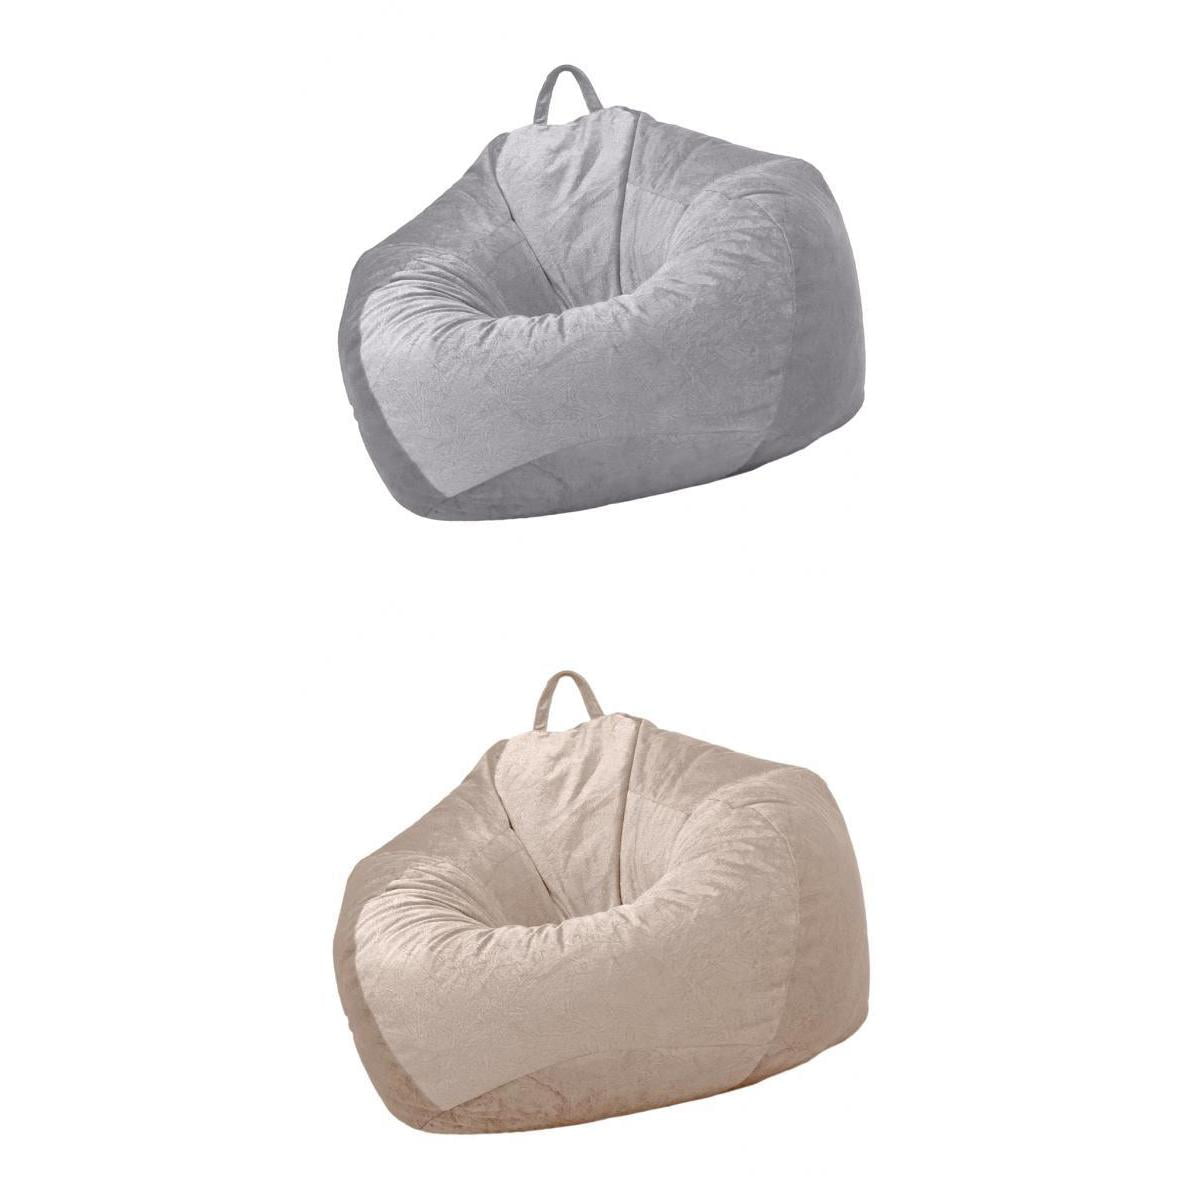 Beige 11 Colors Teens and Adults FLAMEER Set of 2 Stuffed Animal Storage Bean Bag Chair Covers for Kids 